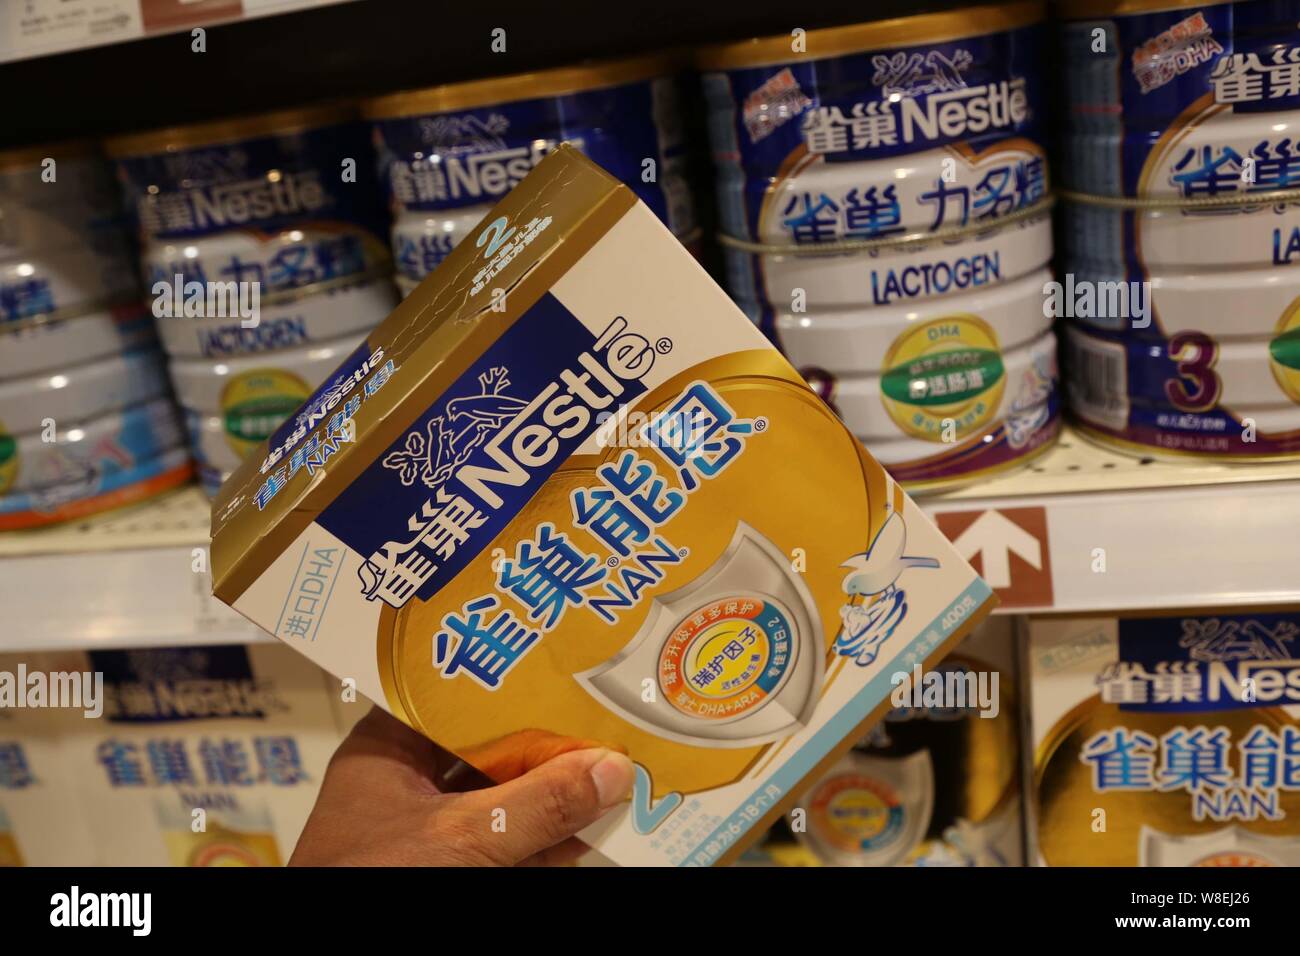 --FILE--A customer shops for a carton of Nestle infant formula at a supermarket in Xuchang city, central China's Henan province, 8 June 2014.   Nestle Stock Photo